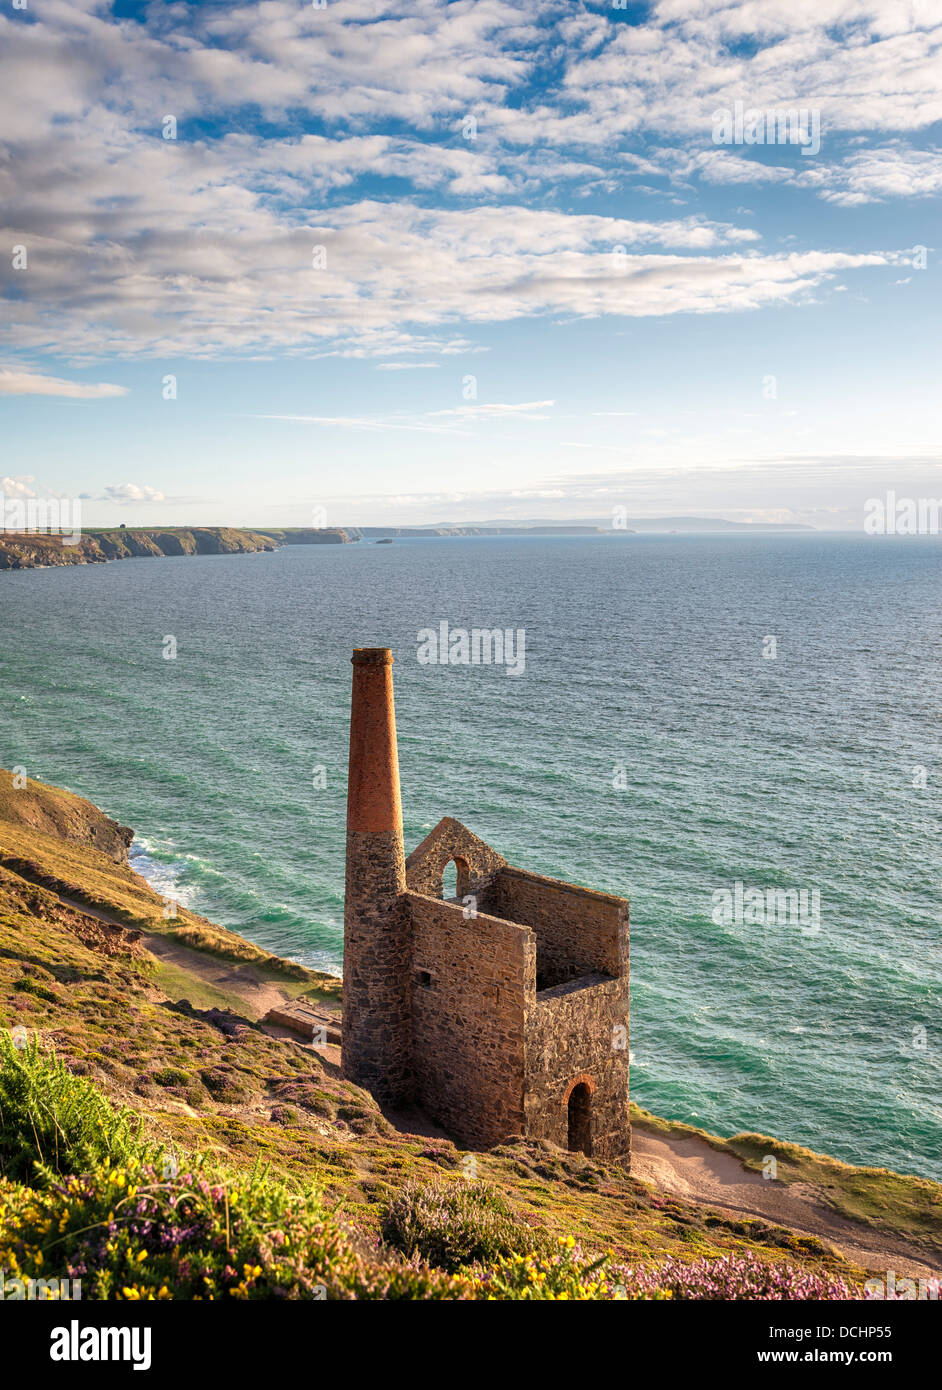 Wheal Coates tine mine engine house on the cliffs at St Agnes in Cornwall Stock Photo